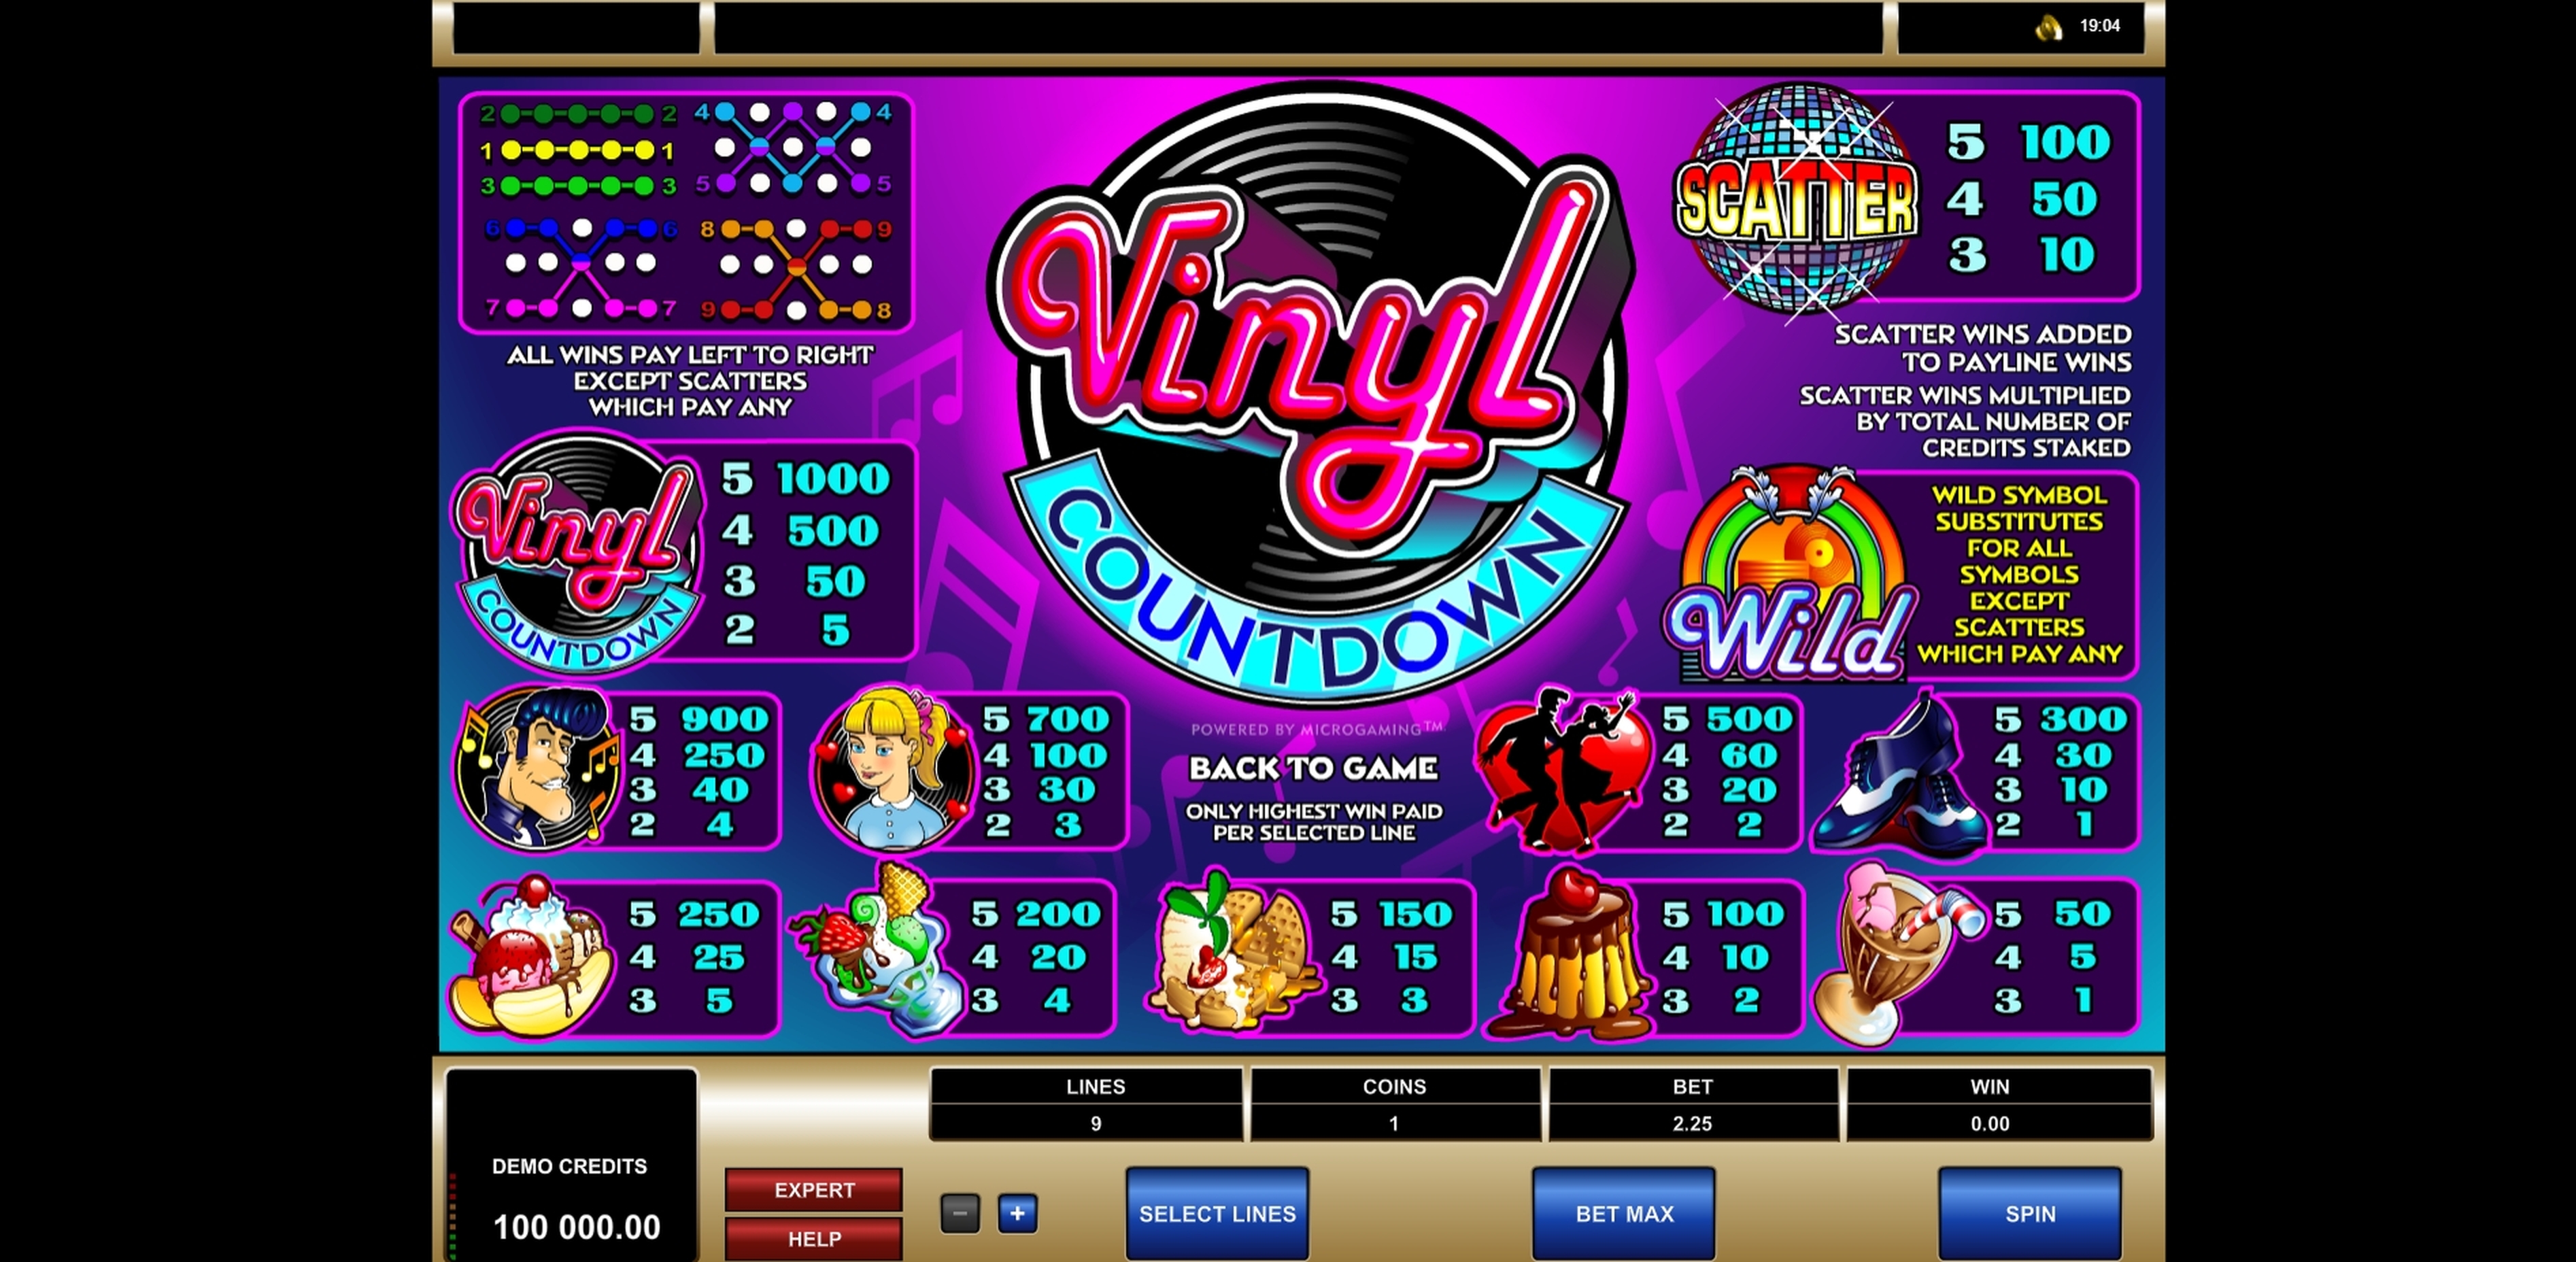 Info of Vinyl Countdown Slot Game by Microgaming